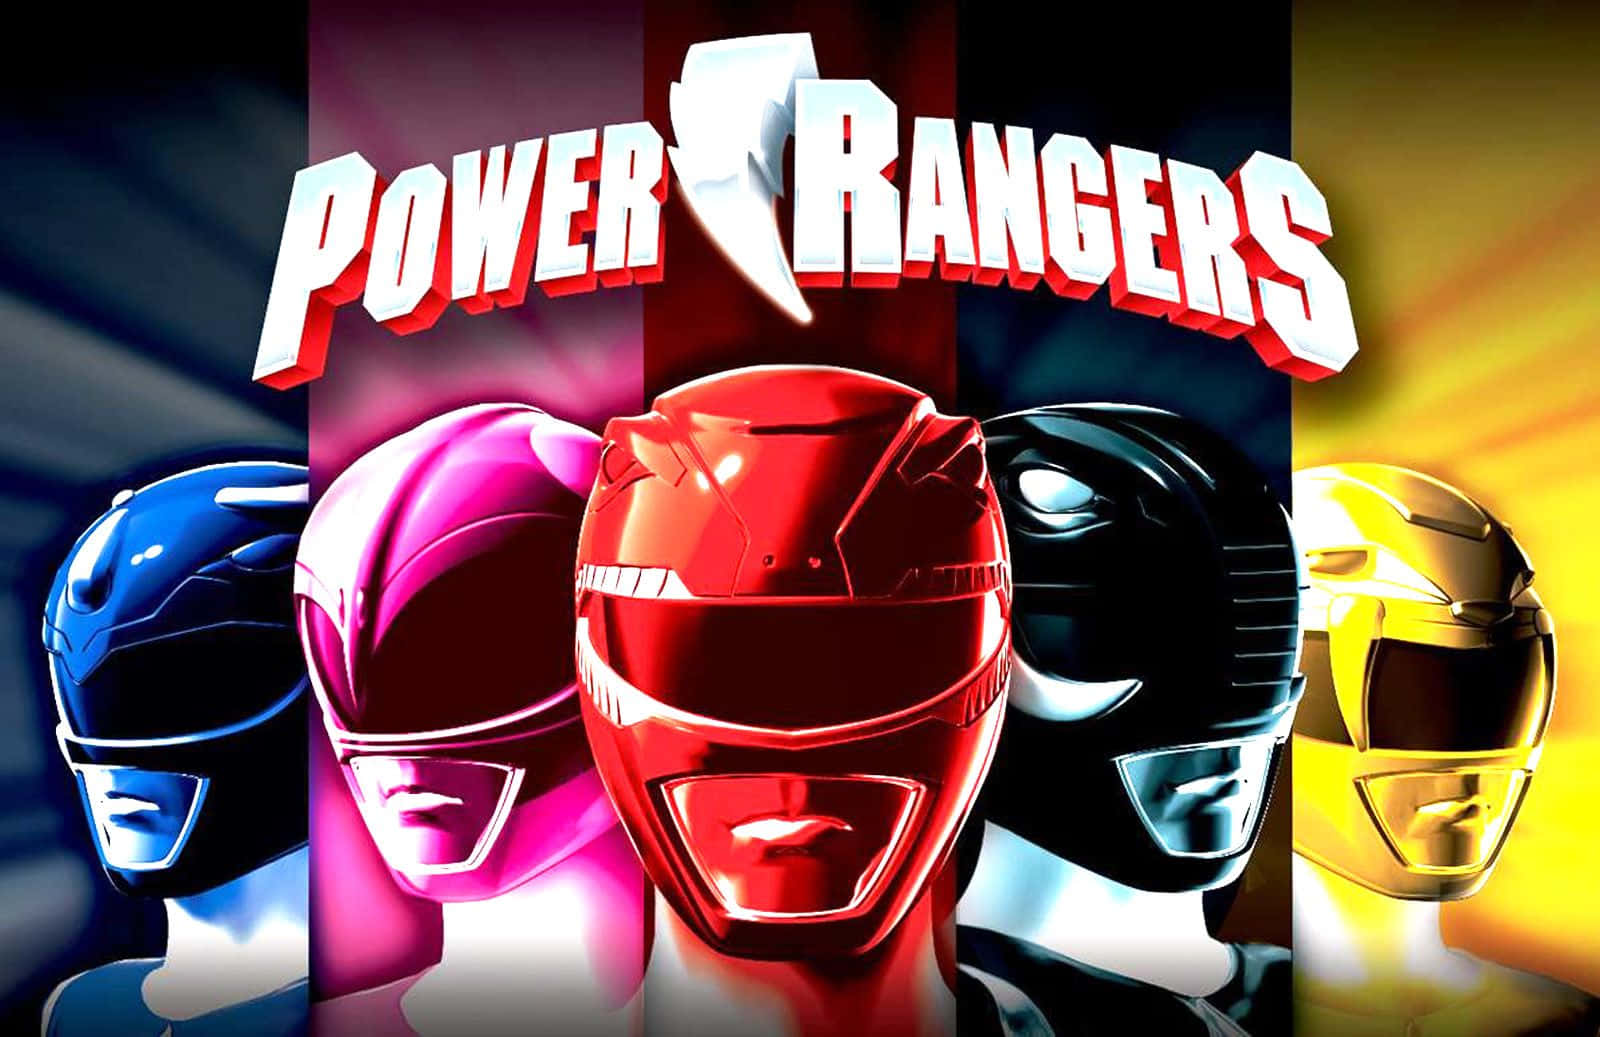 Power Ranger Wallpapers 73 images